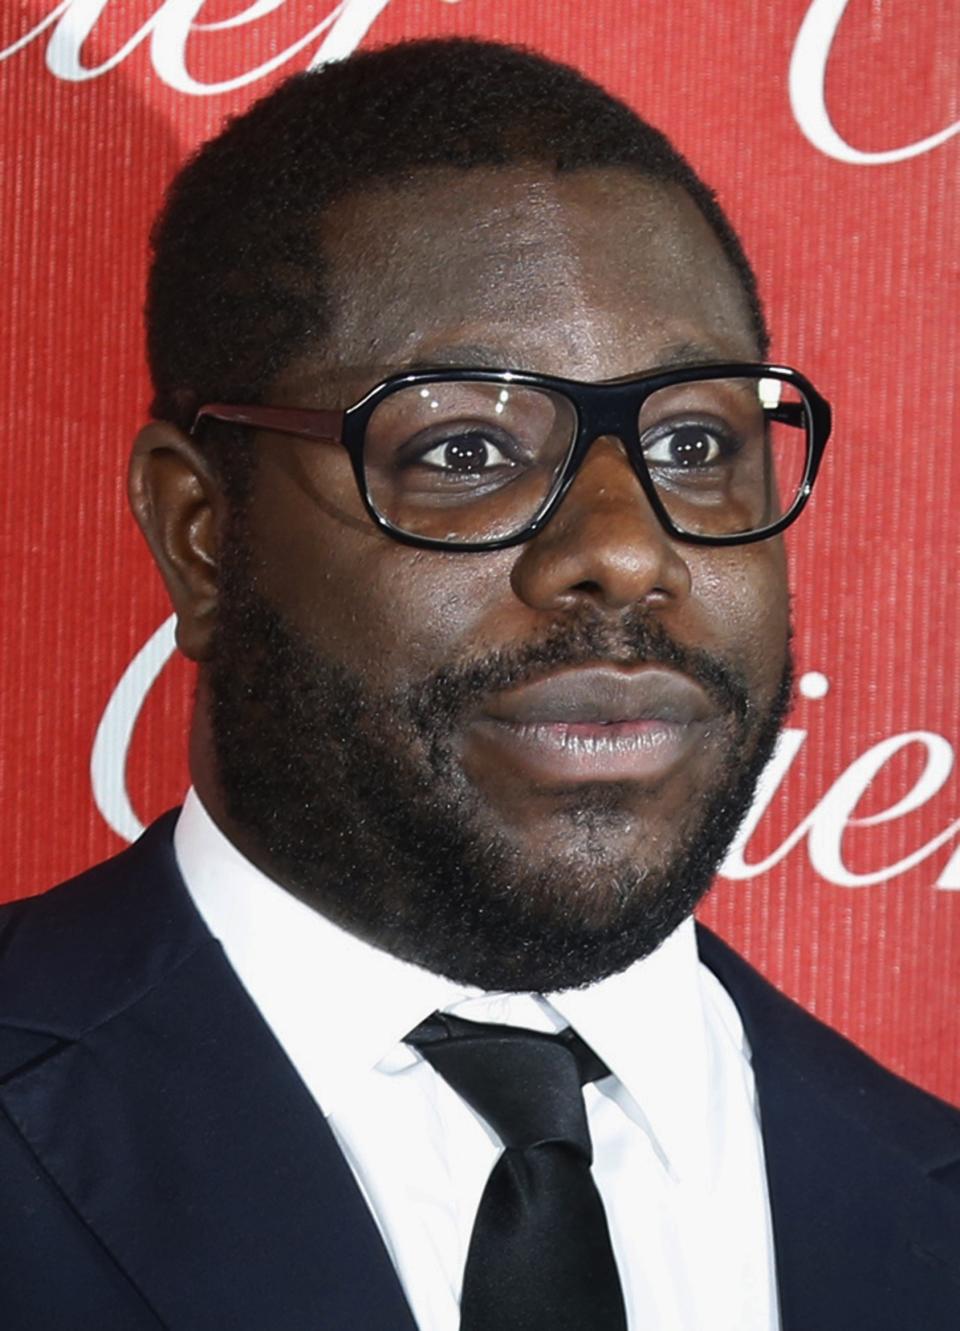 File of British film director Steve McQueen of the film "12 Years A Slave" posing after wining Director of the Year at the 2014 Palm Springs International Film Festival Awards Gala in Palm Springs